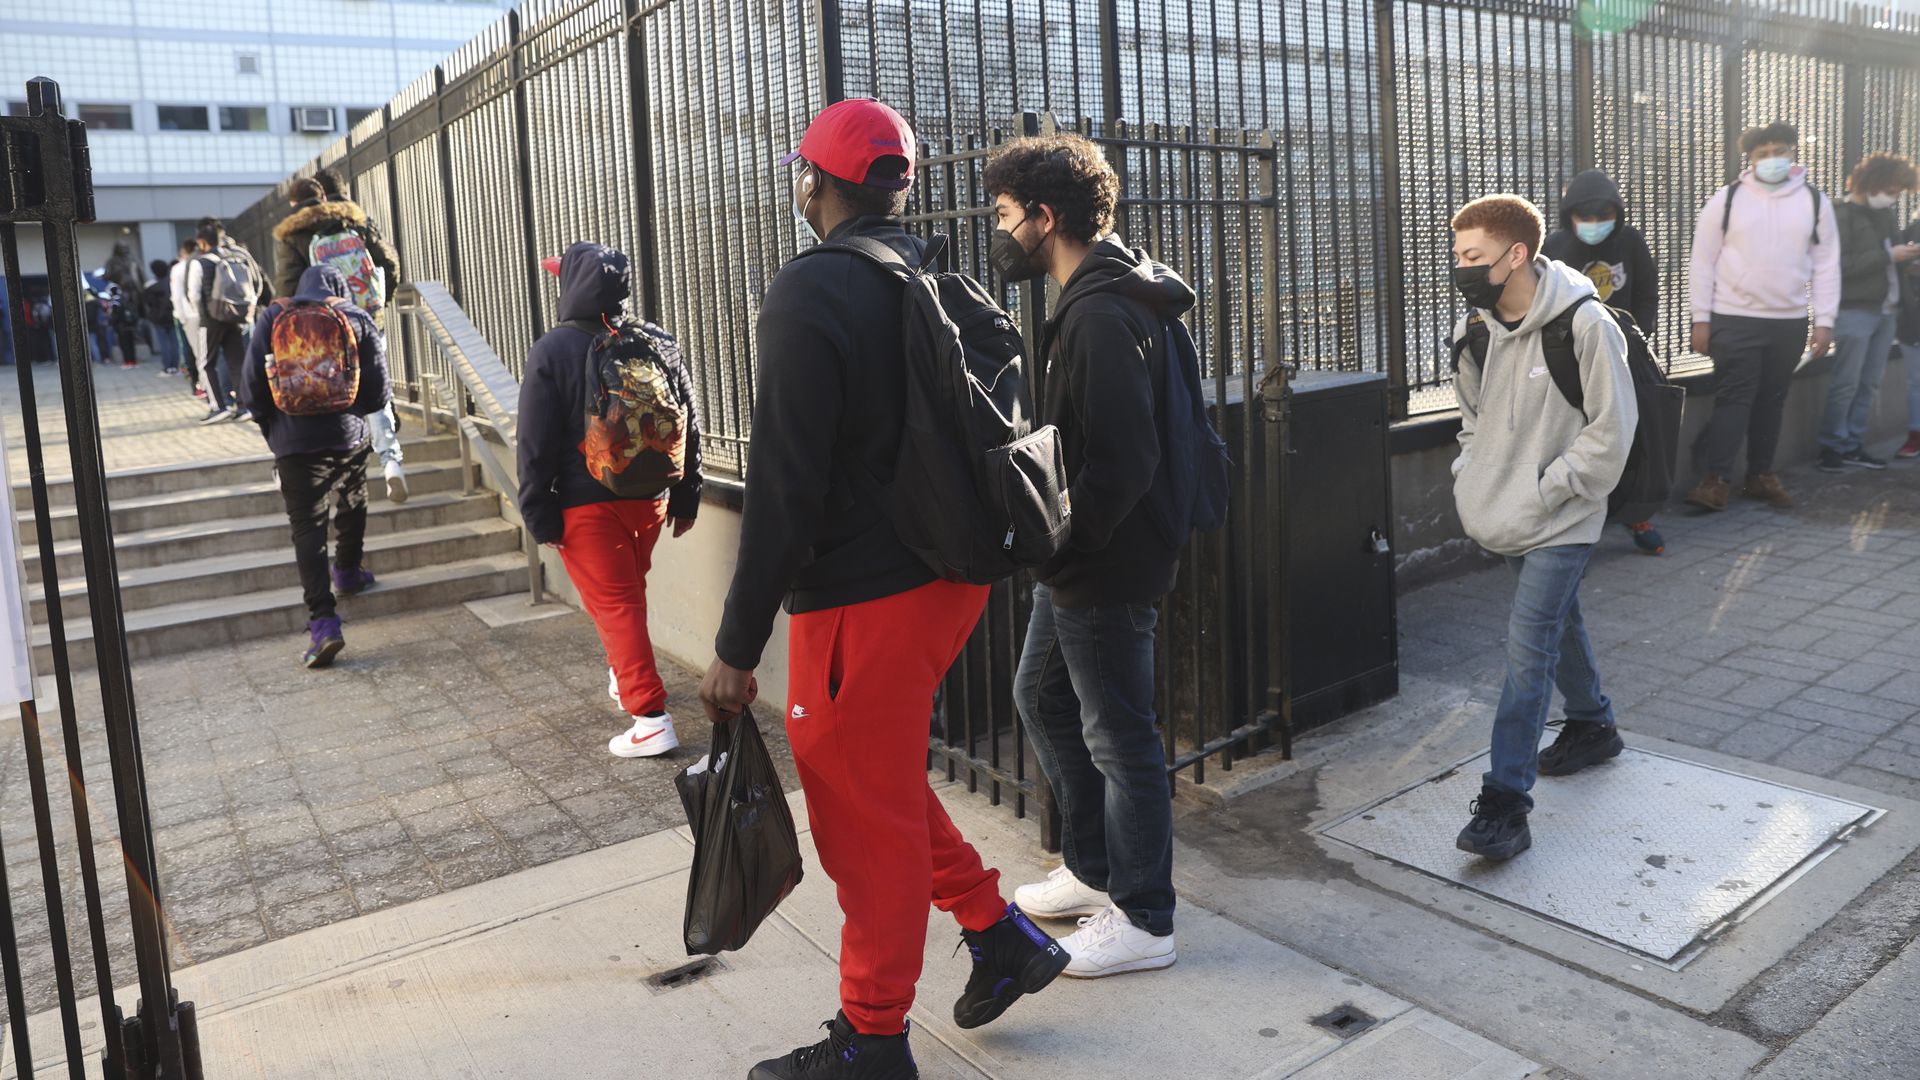 Students wait in line to enter a New York City public high school in New York.